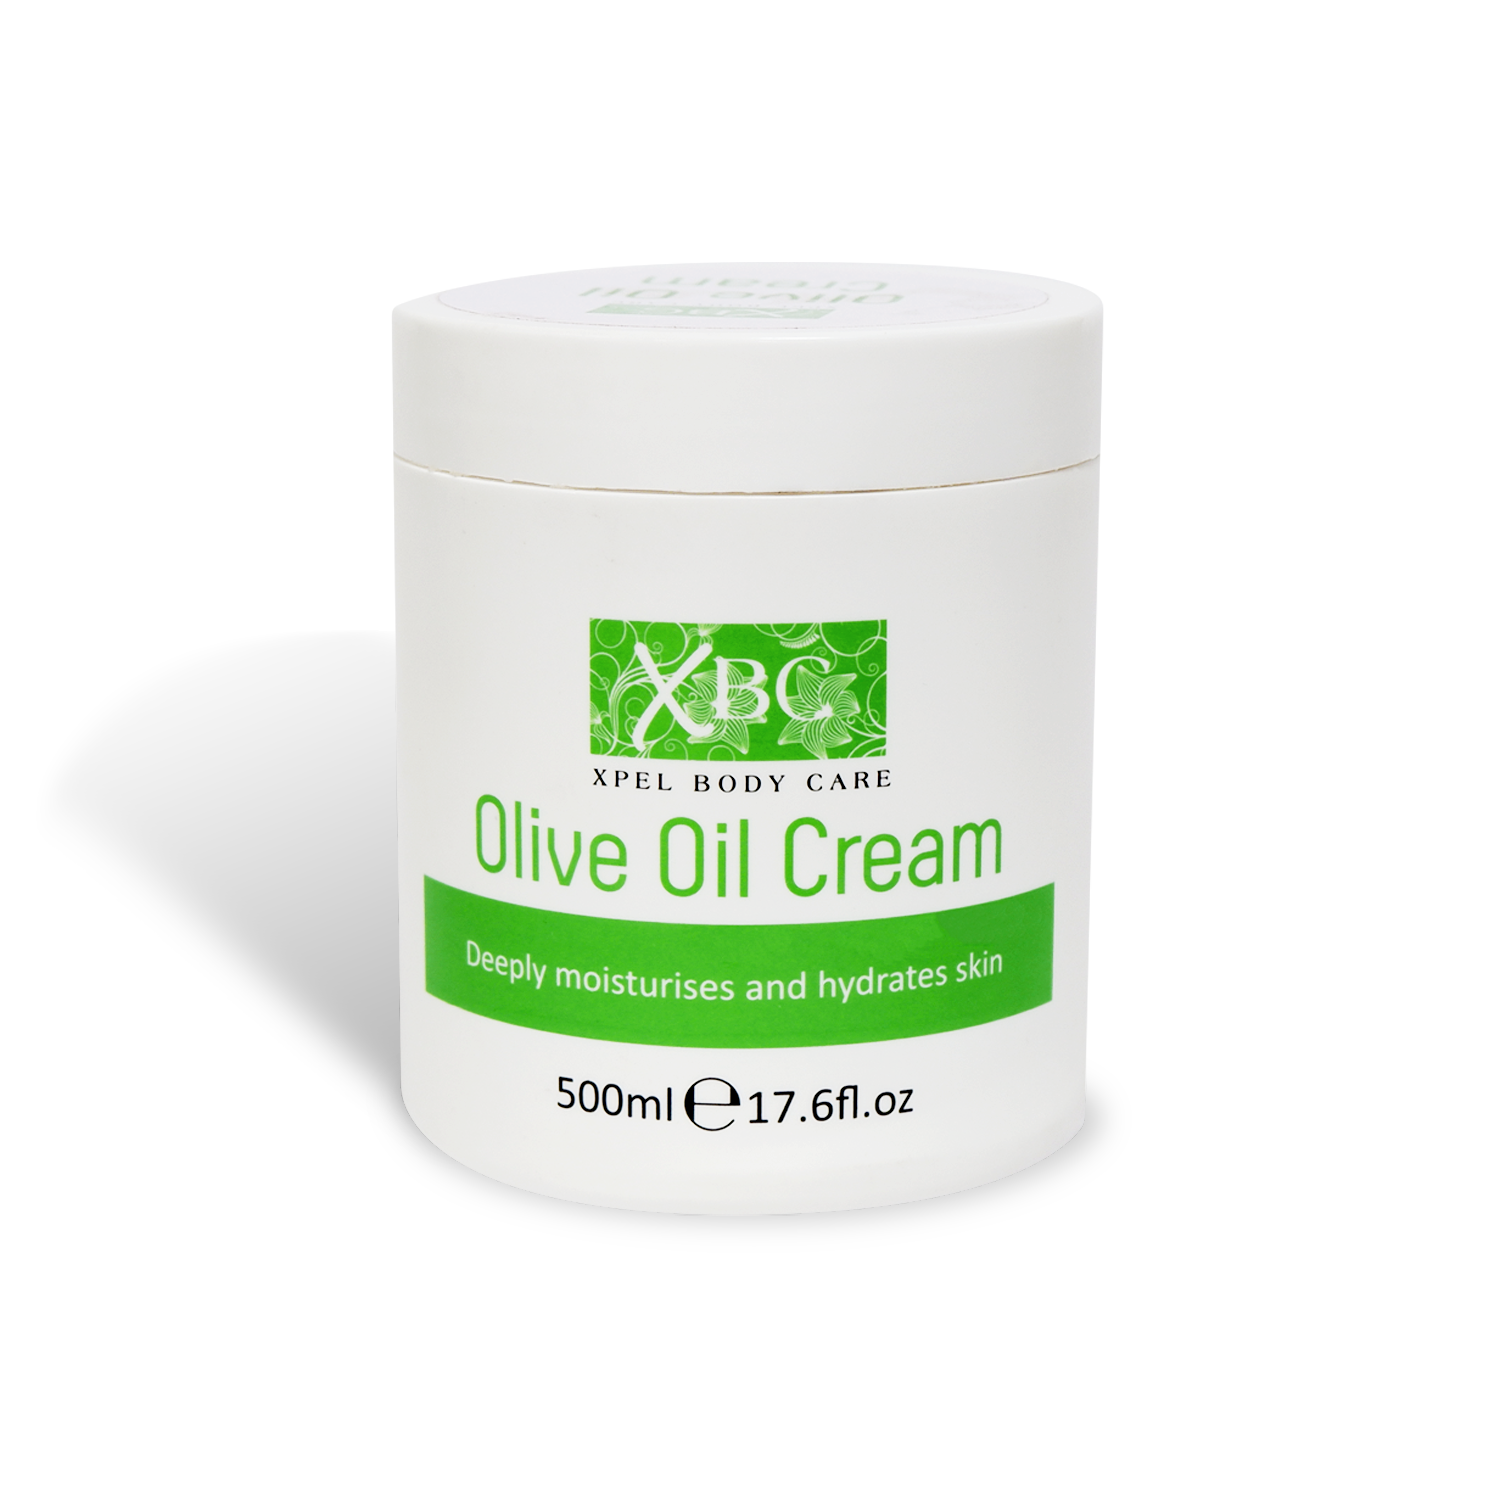 Olive Oil Cream with Olive oil has been specially formulated soothe dry and sensitive skin to help it, feeling perfectly hydrated and irresistibly soft 500 ml